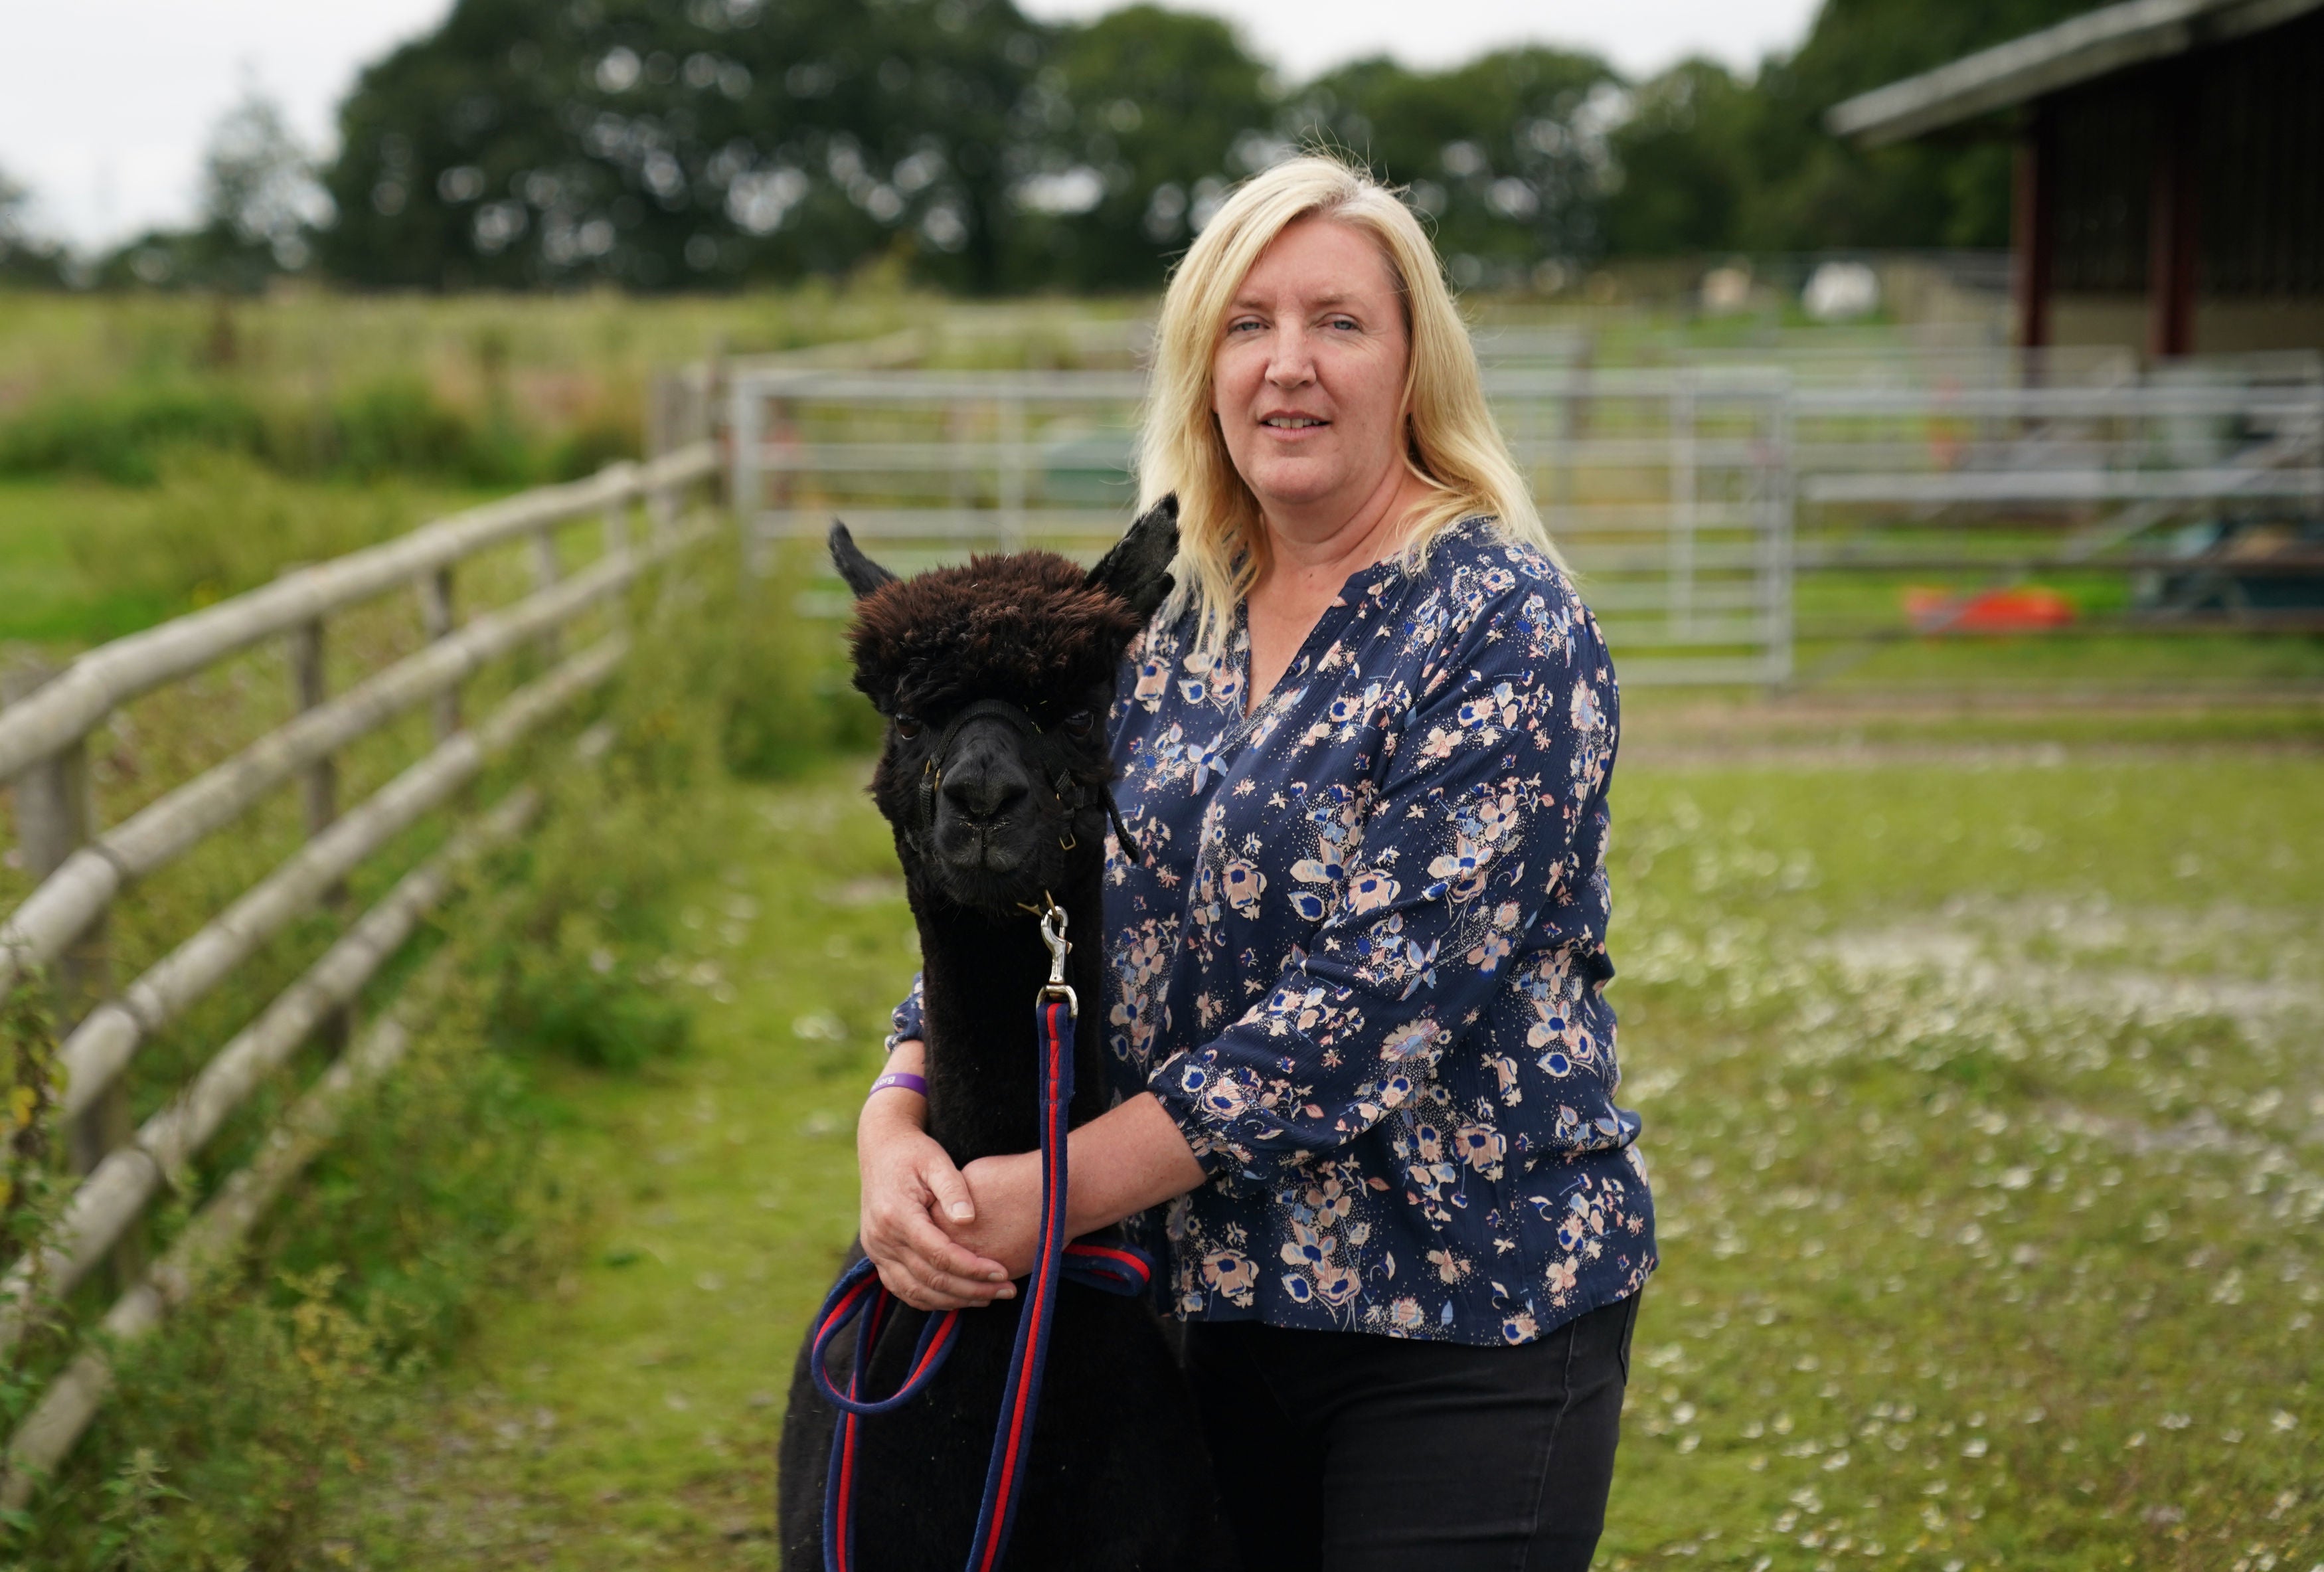 Geronimo’s owner Helen Macdonald has always questioned the accuracy of previous positive TB test results